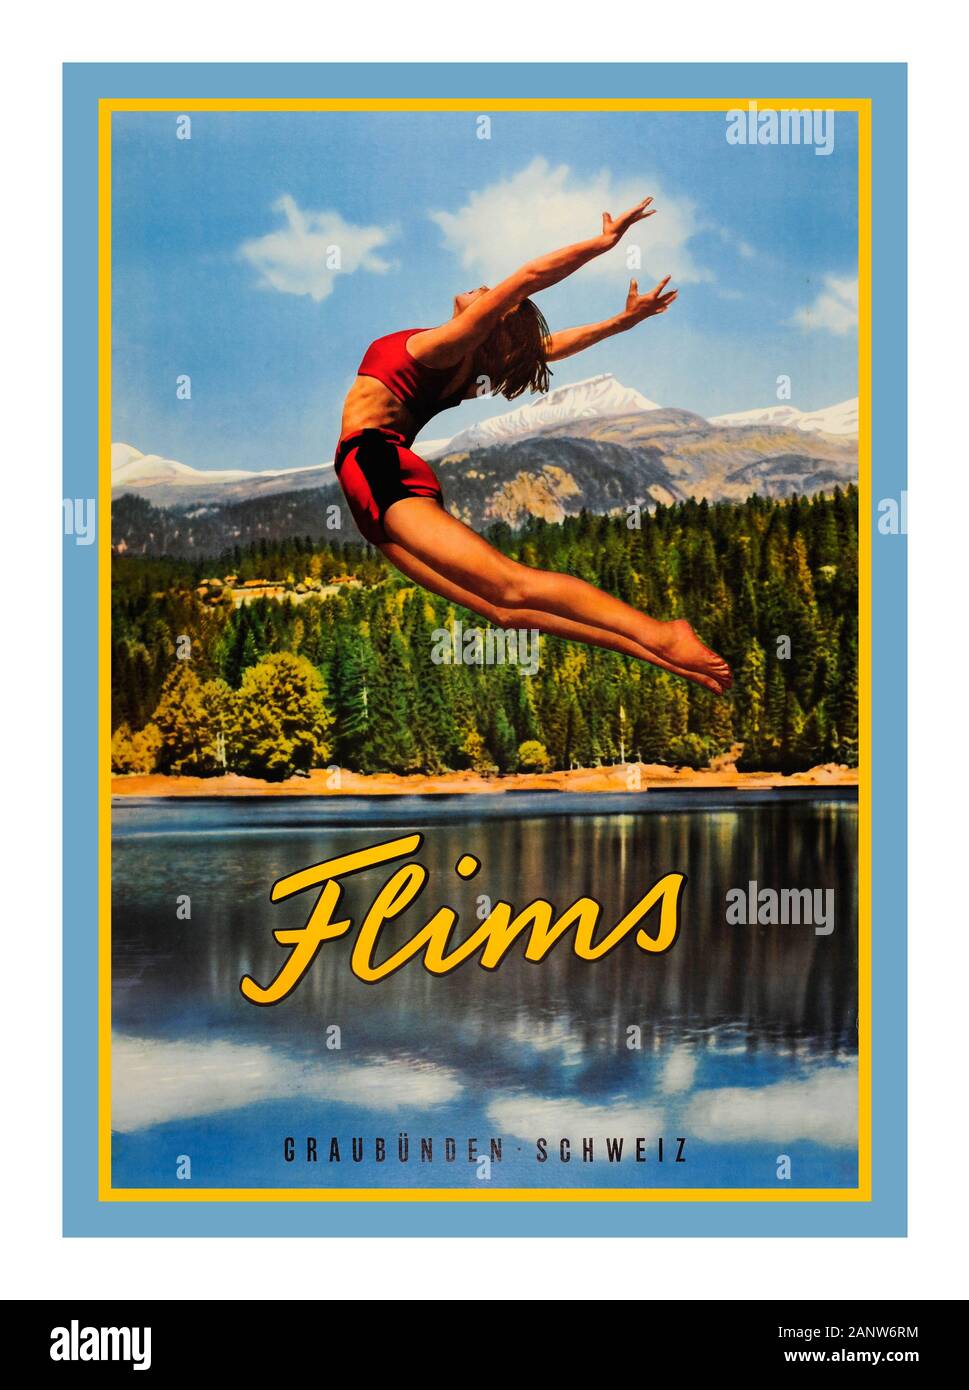 Vintage 1930's travel poster for Flims Graubunden Schweiz featuring a dynamic colourful photo by Jules Geiger of a lady in a red swimming suit jumping into a lake with the evergreen trees and snow topped mountains in the background reflecting on the clear water. Located in the Imboden region of Graubunden, Flims is dominated by the Flimserstein mountain (a UNESCO world heritage site). Printed in Switzerland 1936 designer: Jules Geiger, Stock Photo